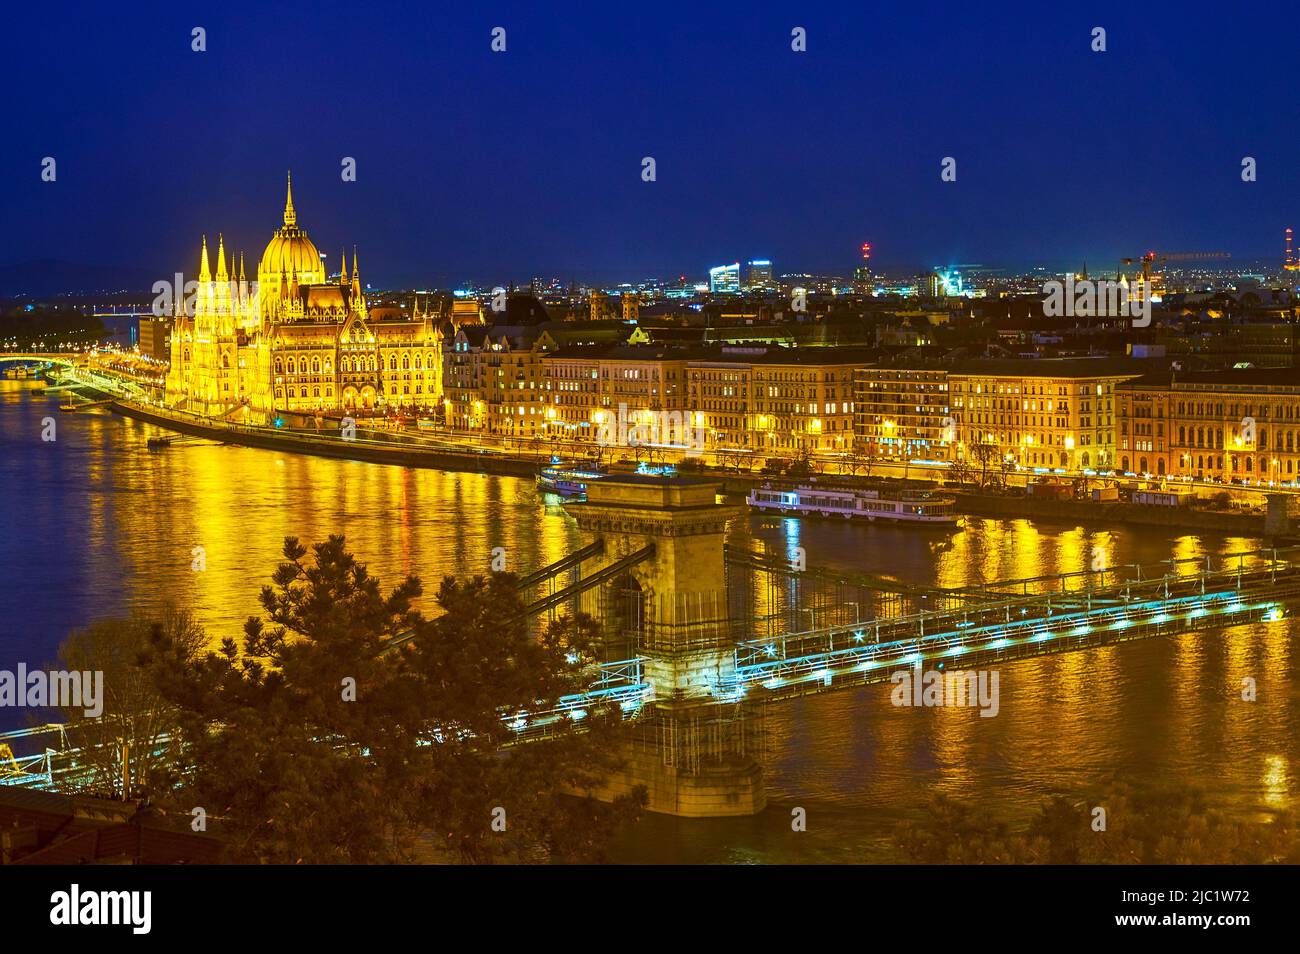 The bright night illumination of Parliament and other buildings on Pest side of Budapest, Hungary Stock Photo